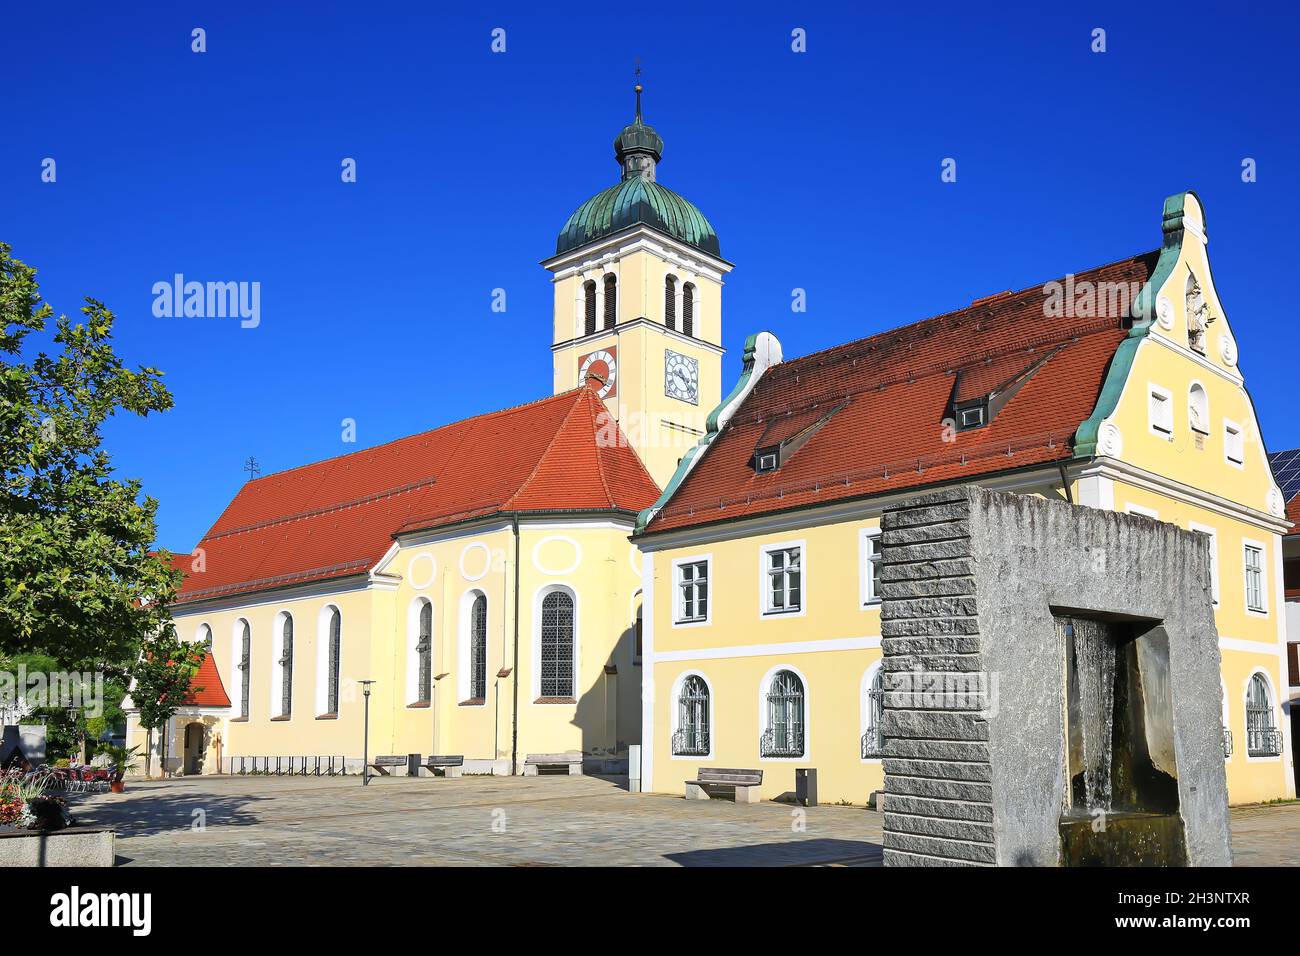 The old town hall is a sight of the town of Marktoberdorf Stock Photo